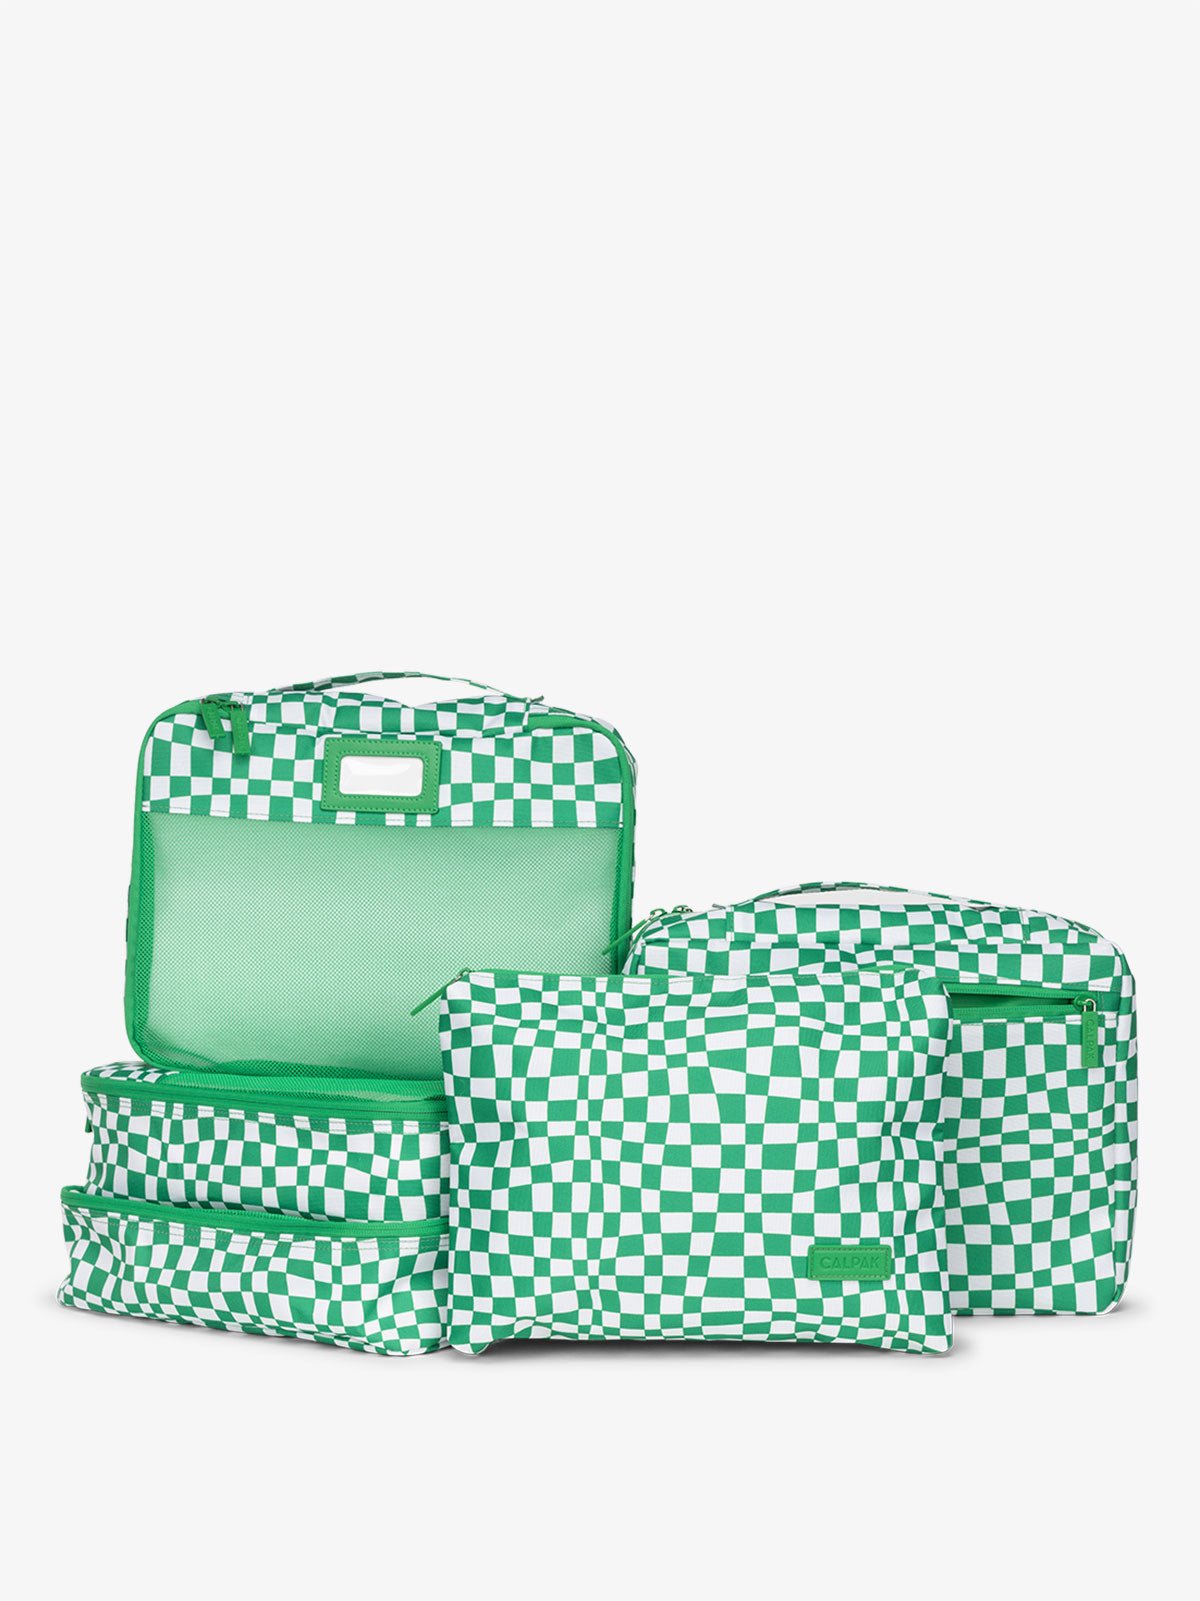 CALPAK 5 piece set packing cubes for travel with labels and top handles in green checkerboard